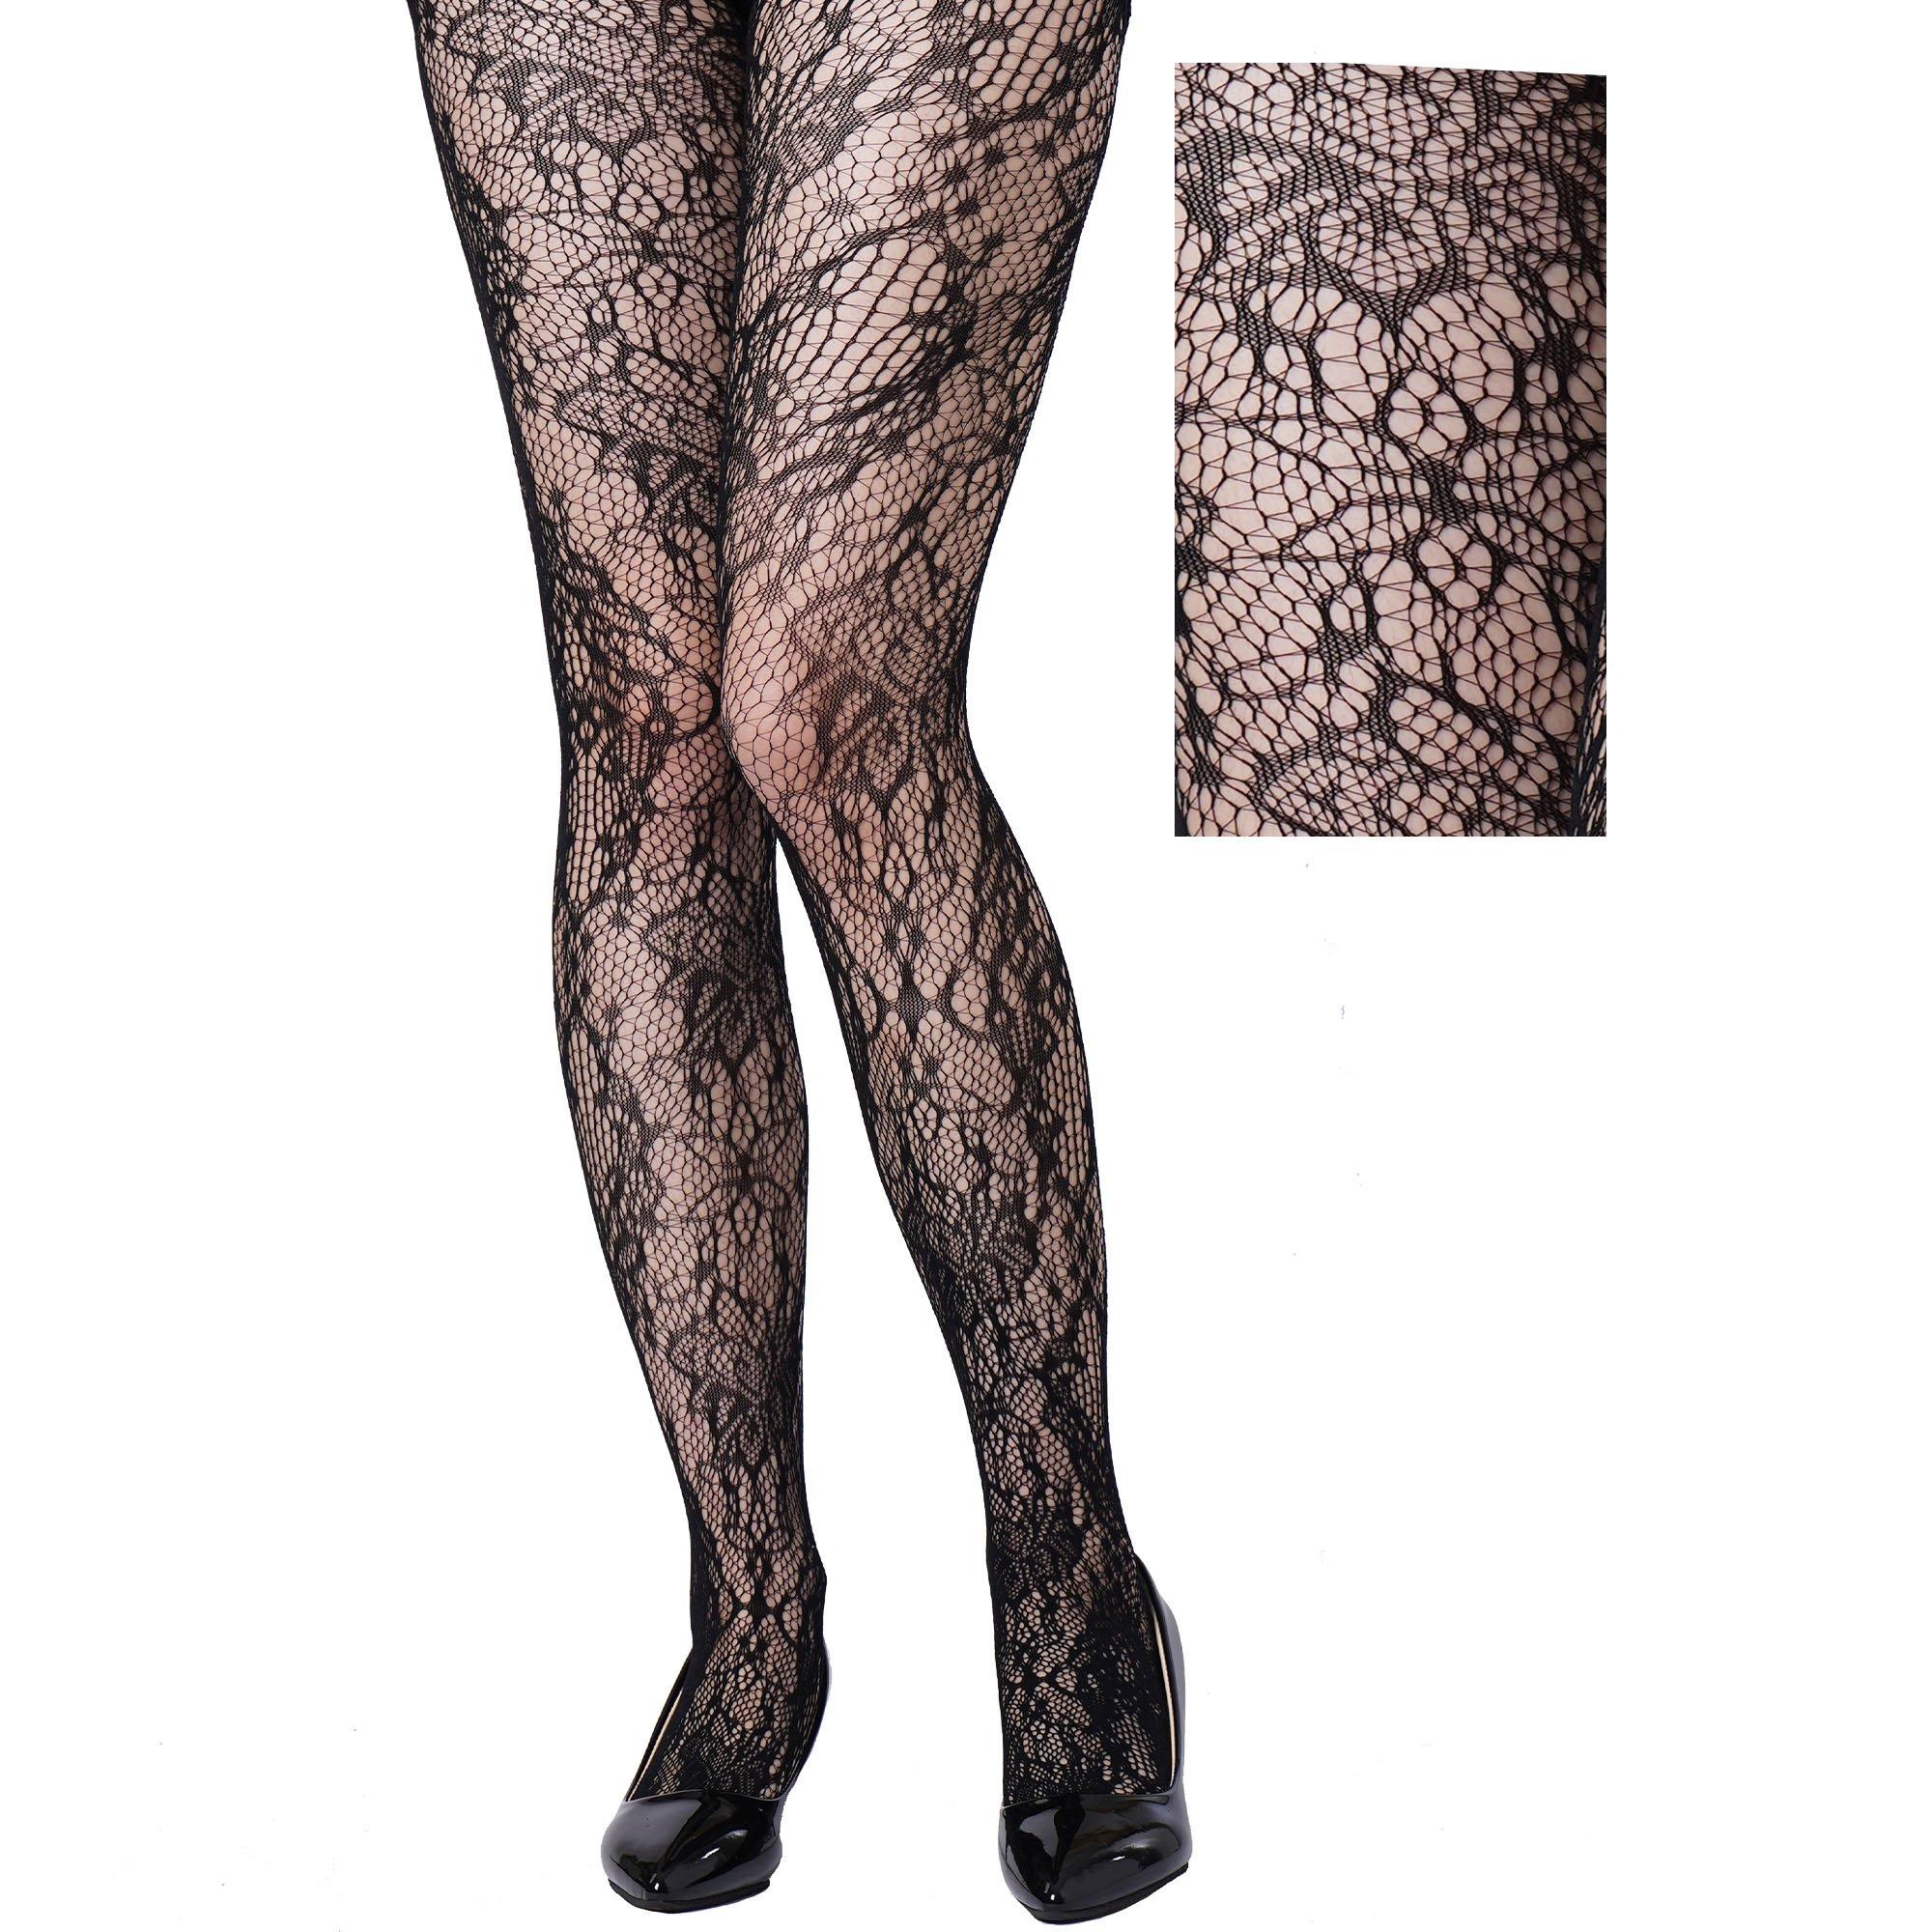  SATINIOR 3 Pairs Women's Fishnet High Waist Fishnet Patterned  Tights Dark Fishnet Stockings Opaque Pantyhose for Women, Black (Butterfly  Style) : Clothing, Shoes & Jewelry